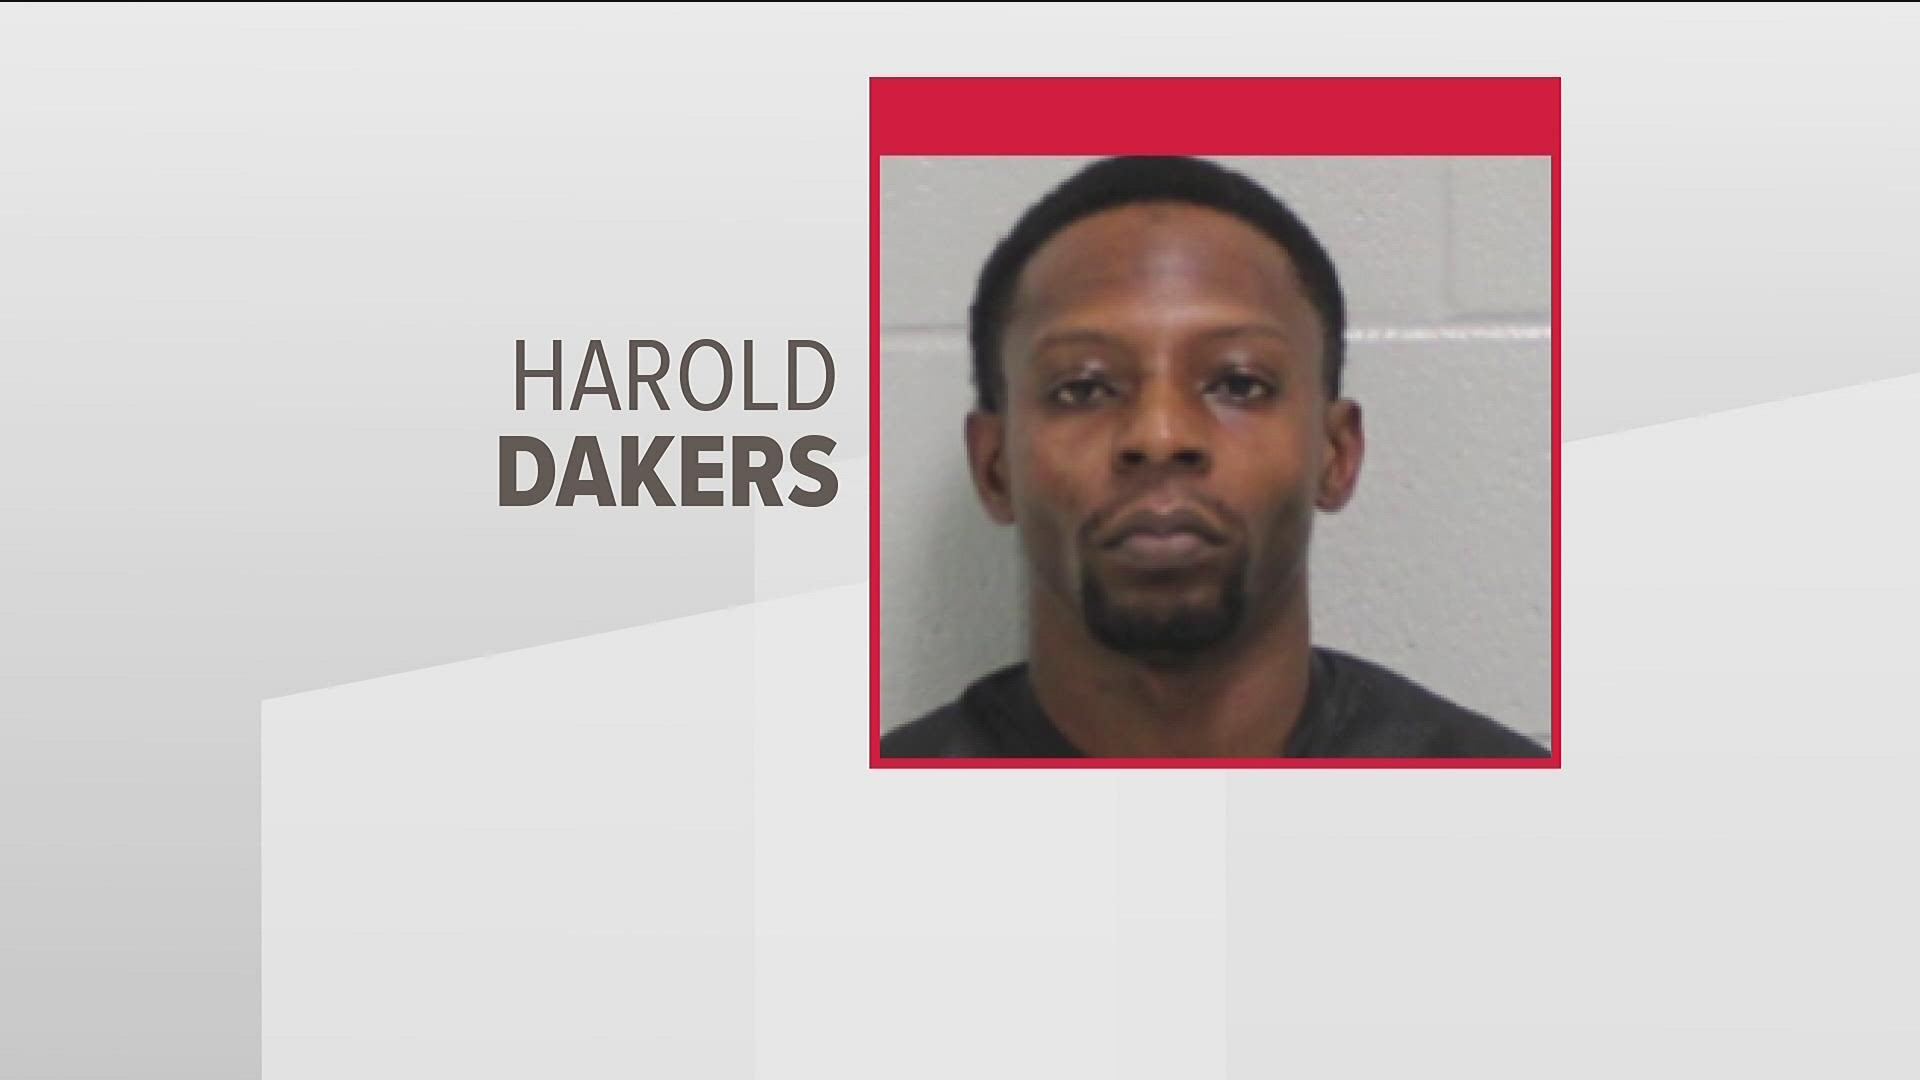 Authorities have been searching for Harold Dakers for days.